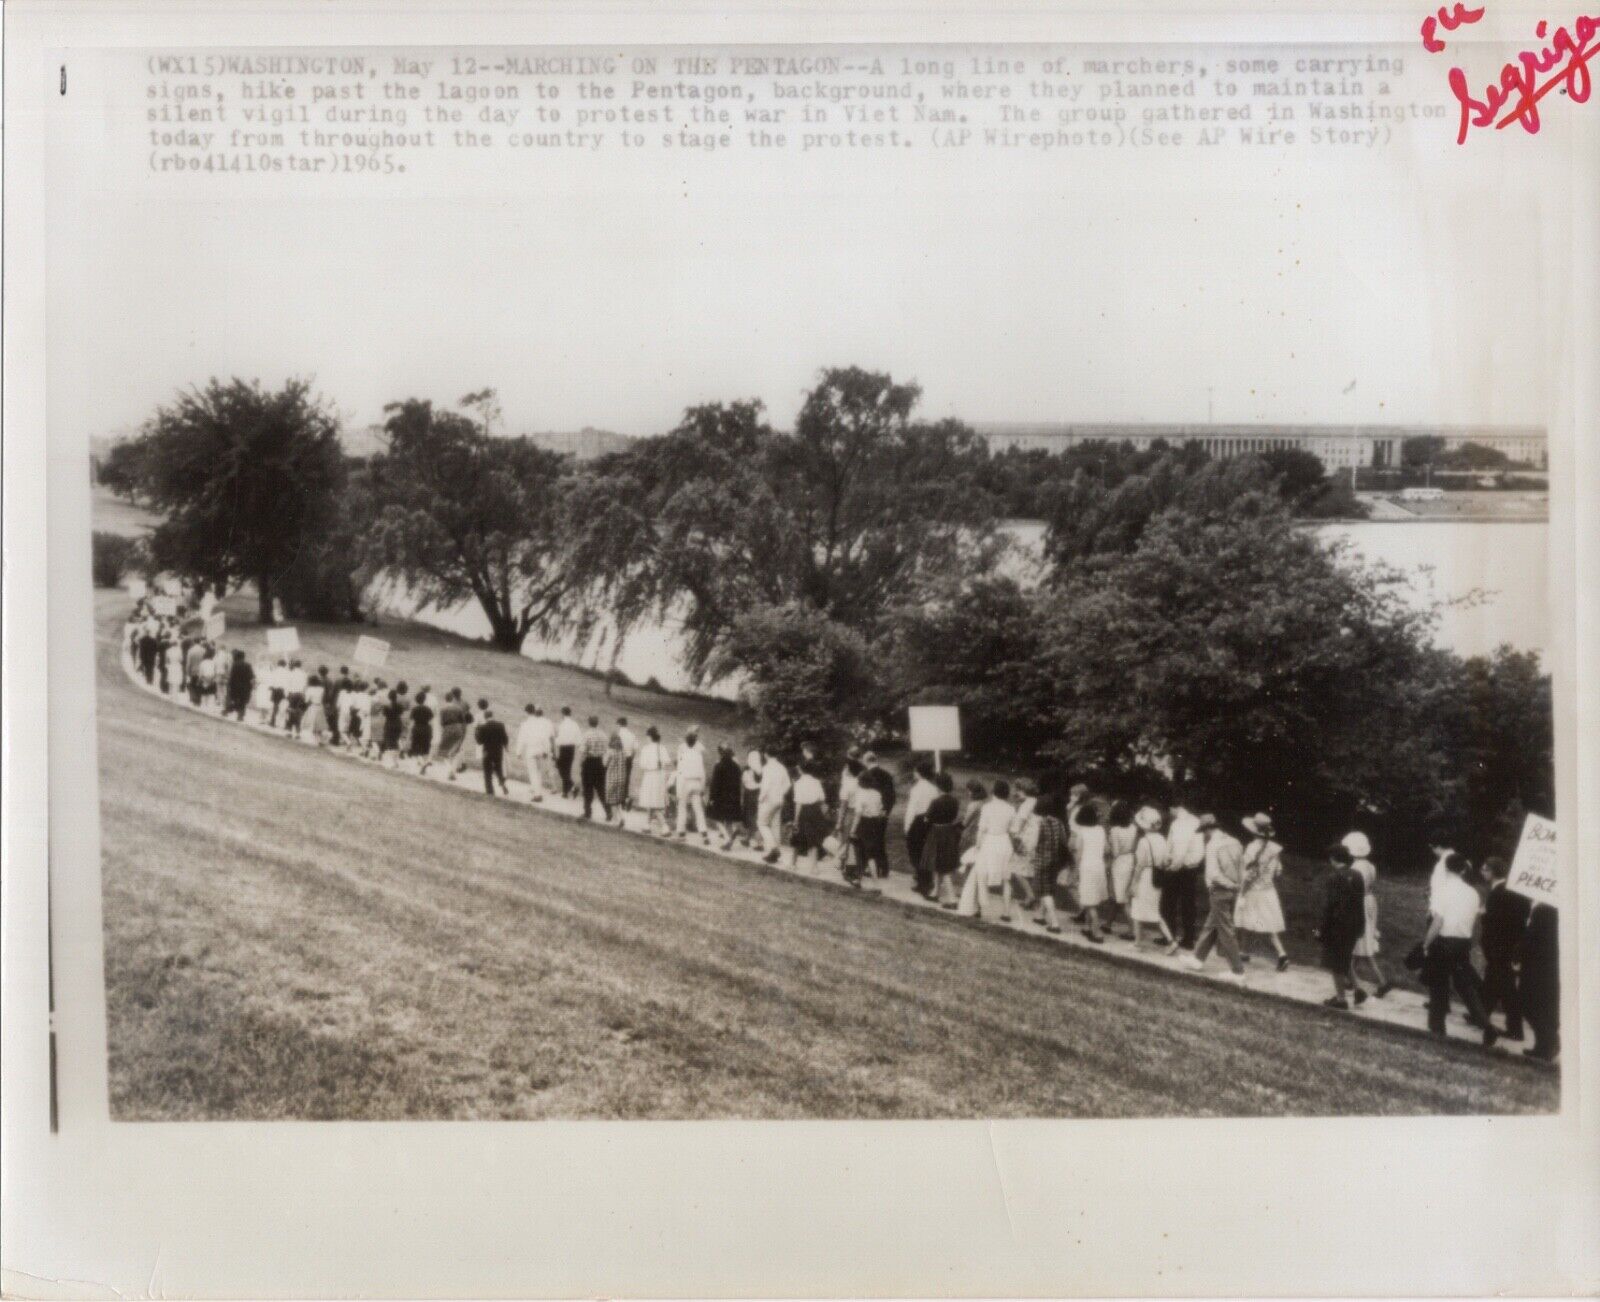 Original 1965 Civil Rights Press Photograph Marching On The Pentagon